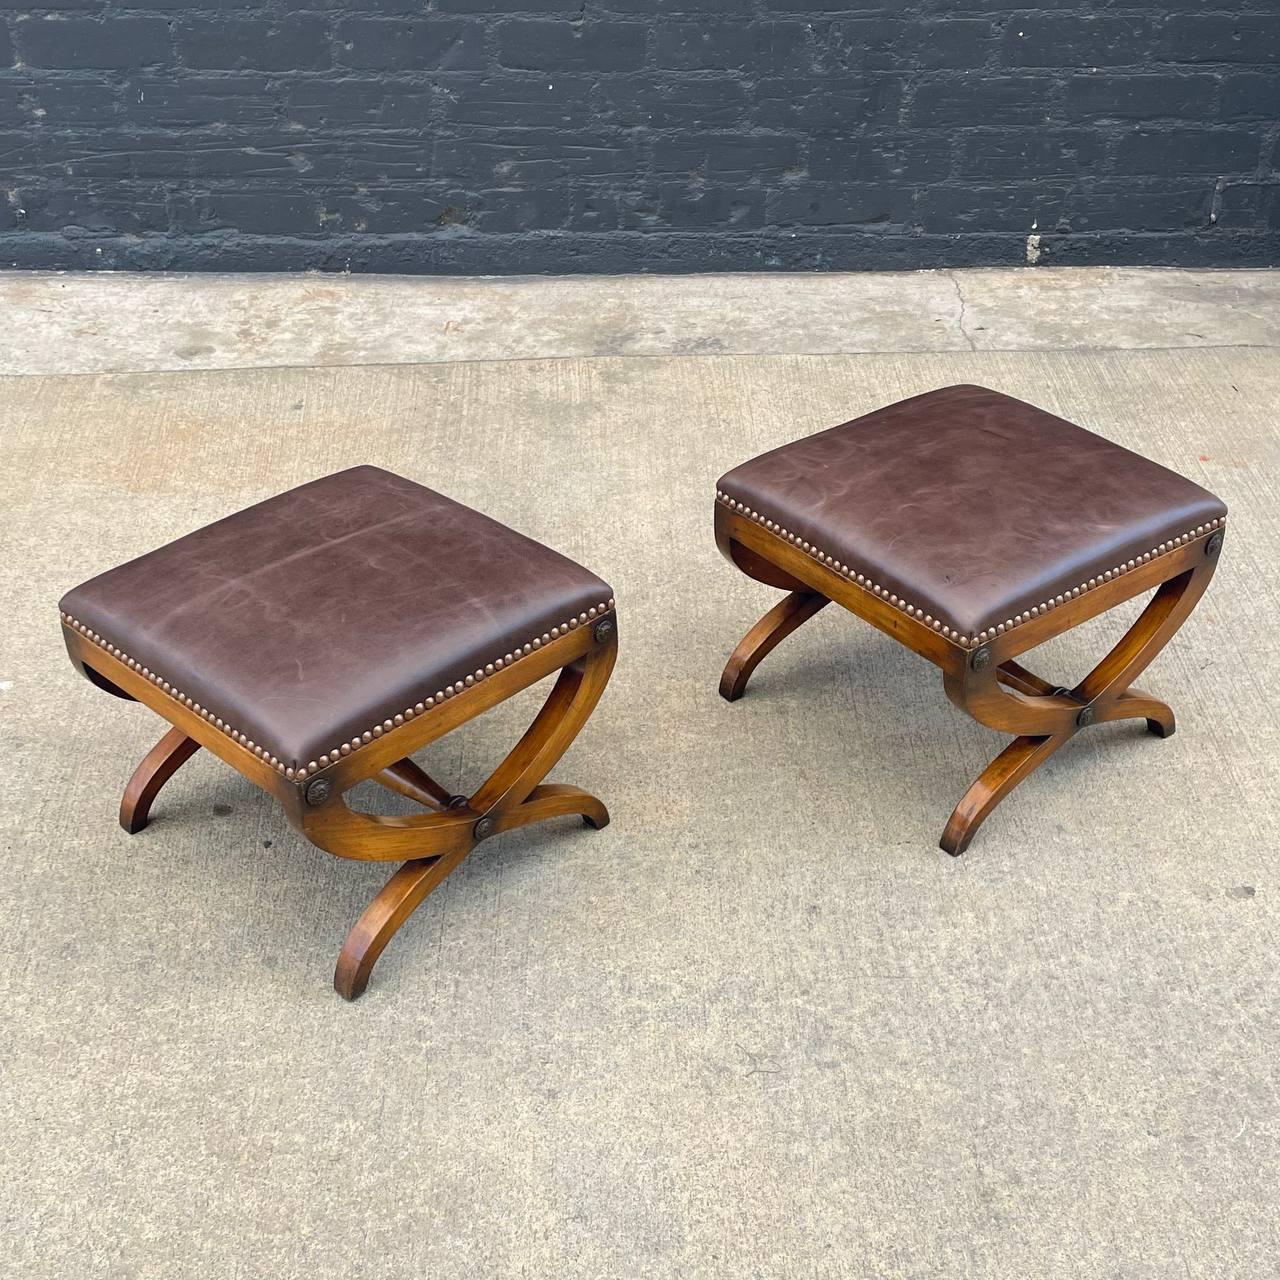 Pair of Neoclassical Style Curule Leather Benches In Good Condition For Sale In Los Angeles, CA